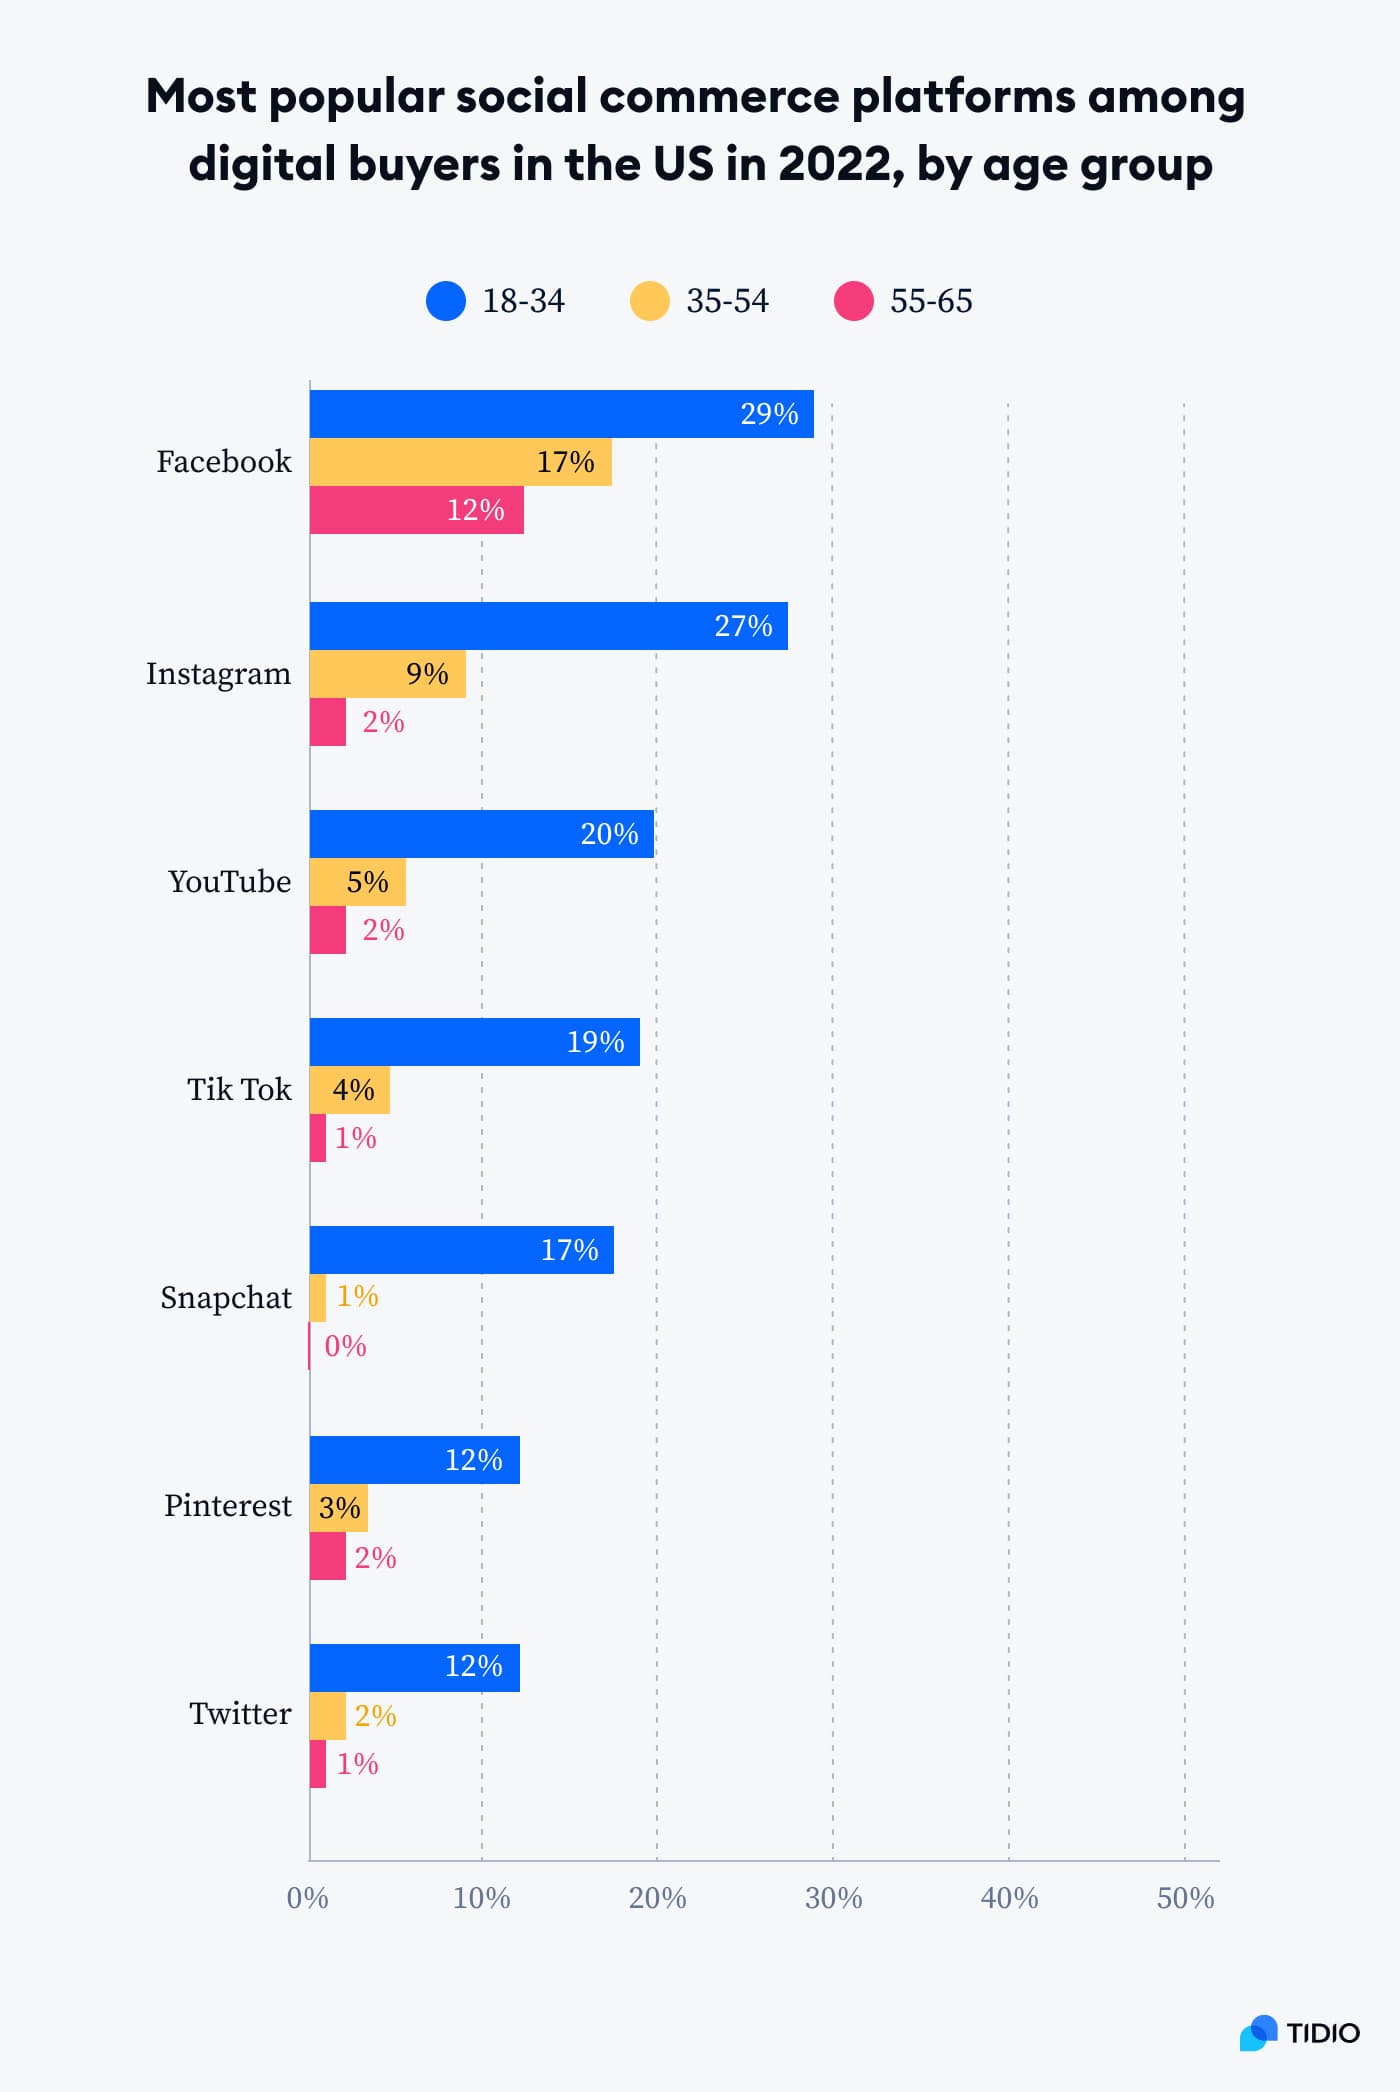 most popular social commerce platform among digital buyers in the US in 2022